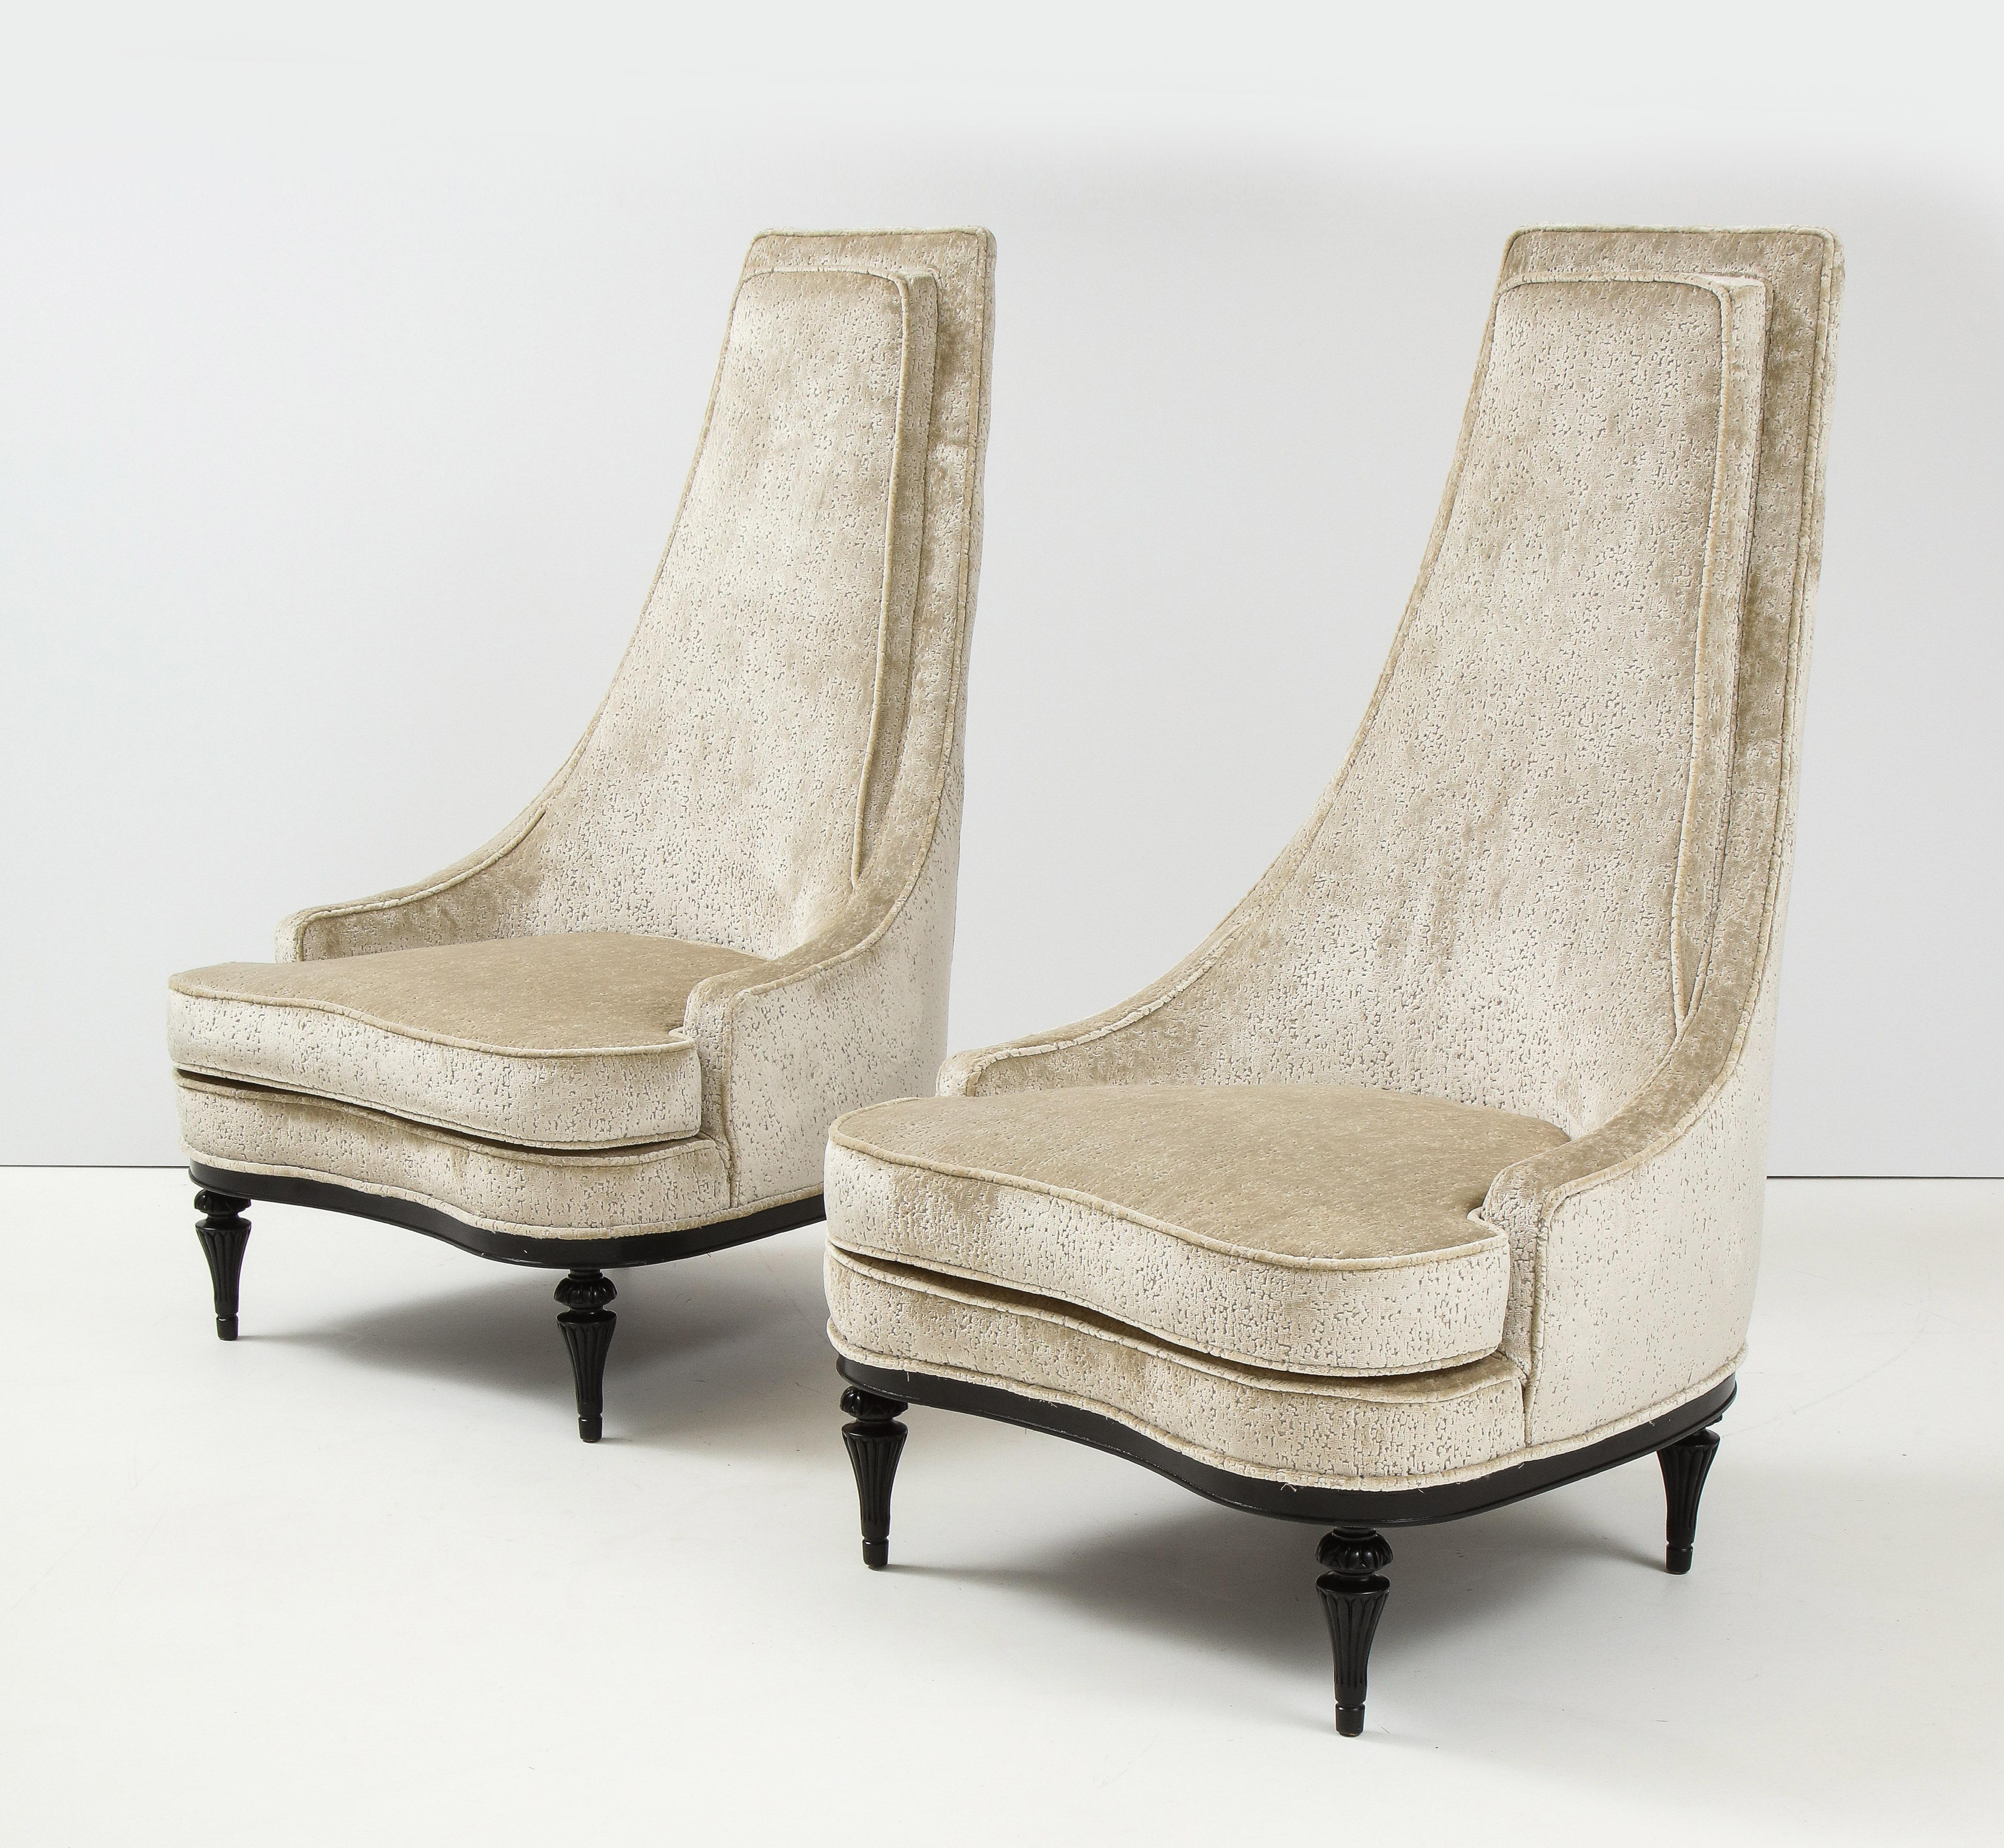 1960s high back slipper chairs by Interior Crafts, fully restored and re-upholstered in velvet.